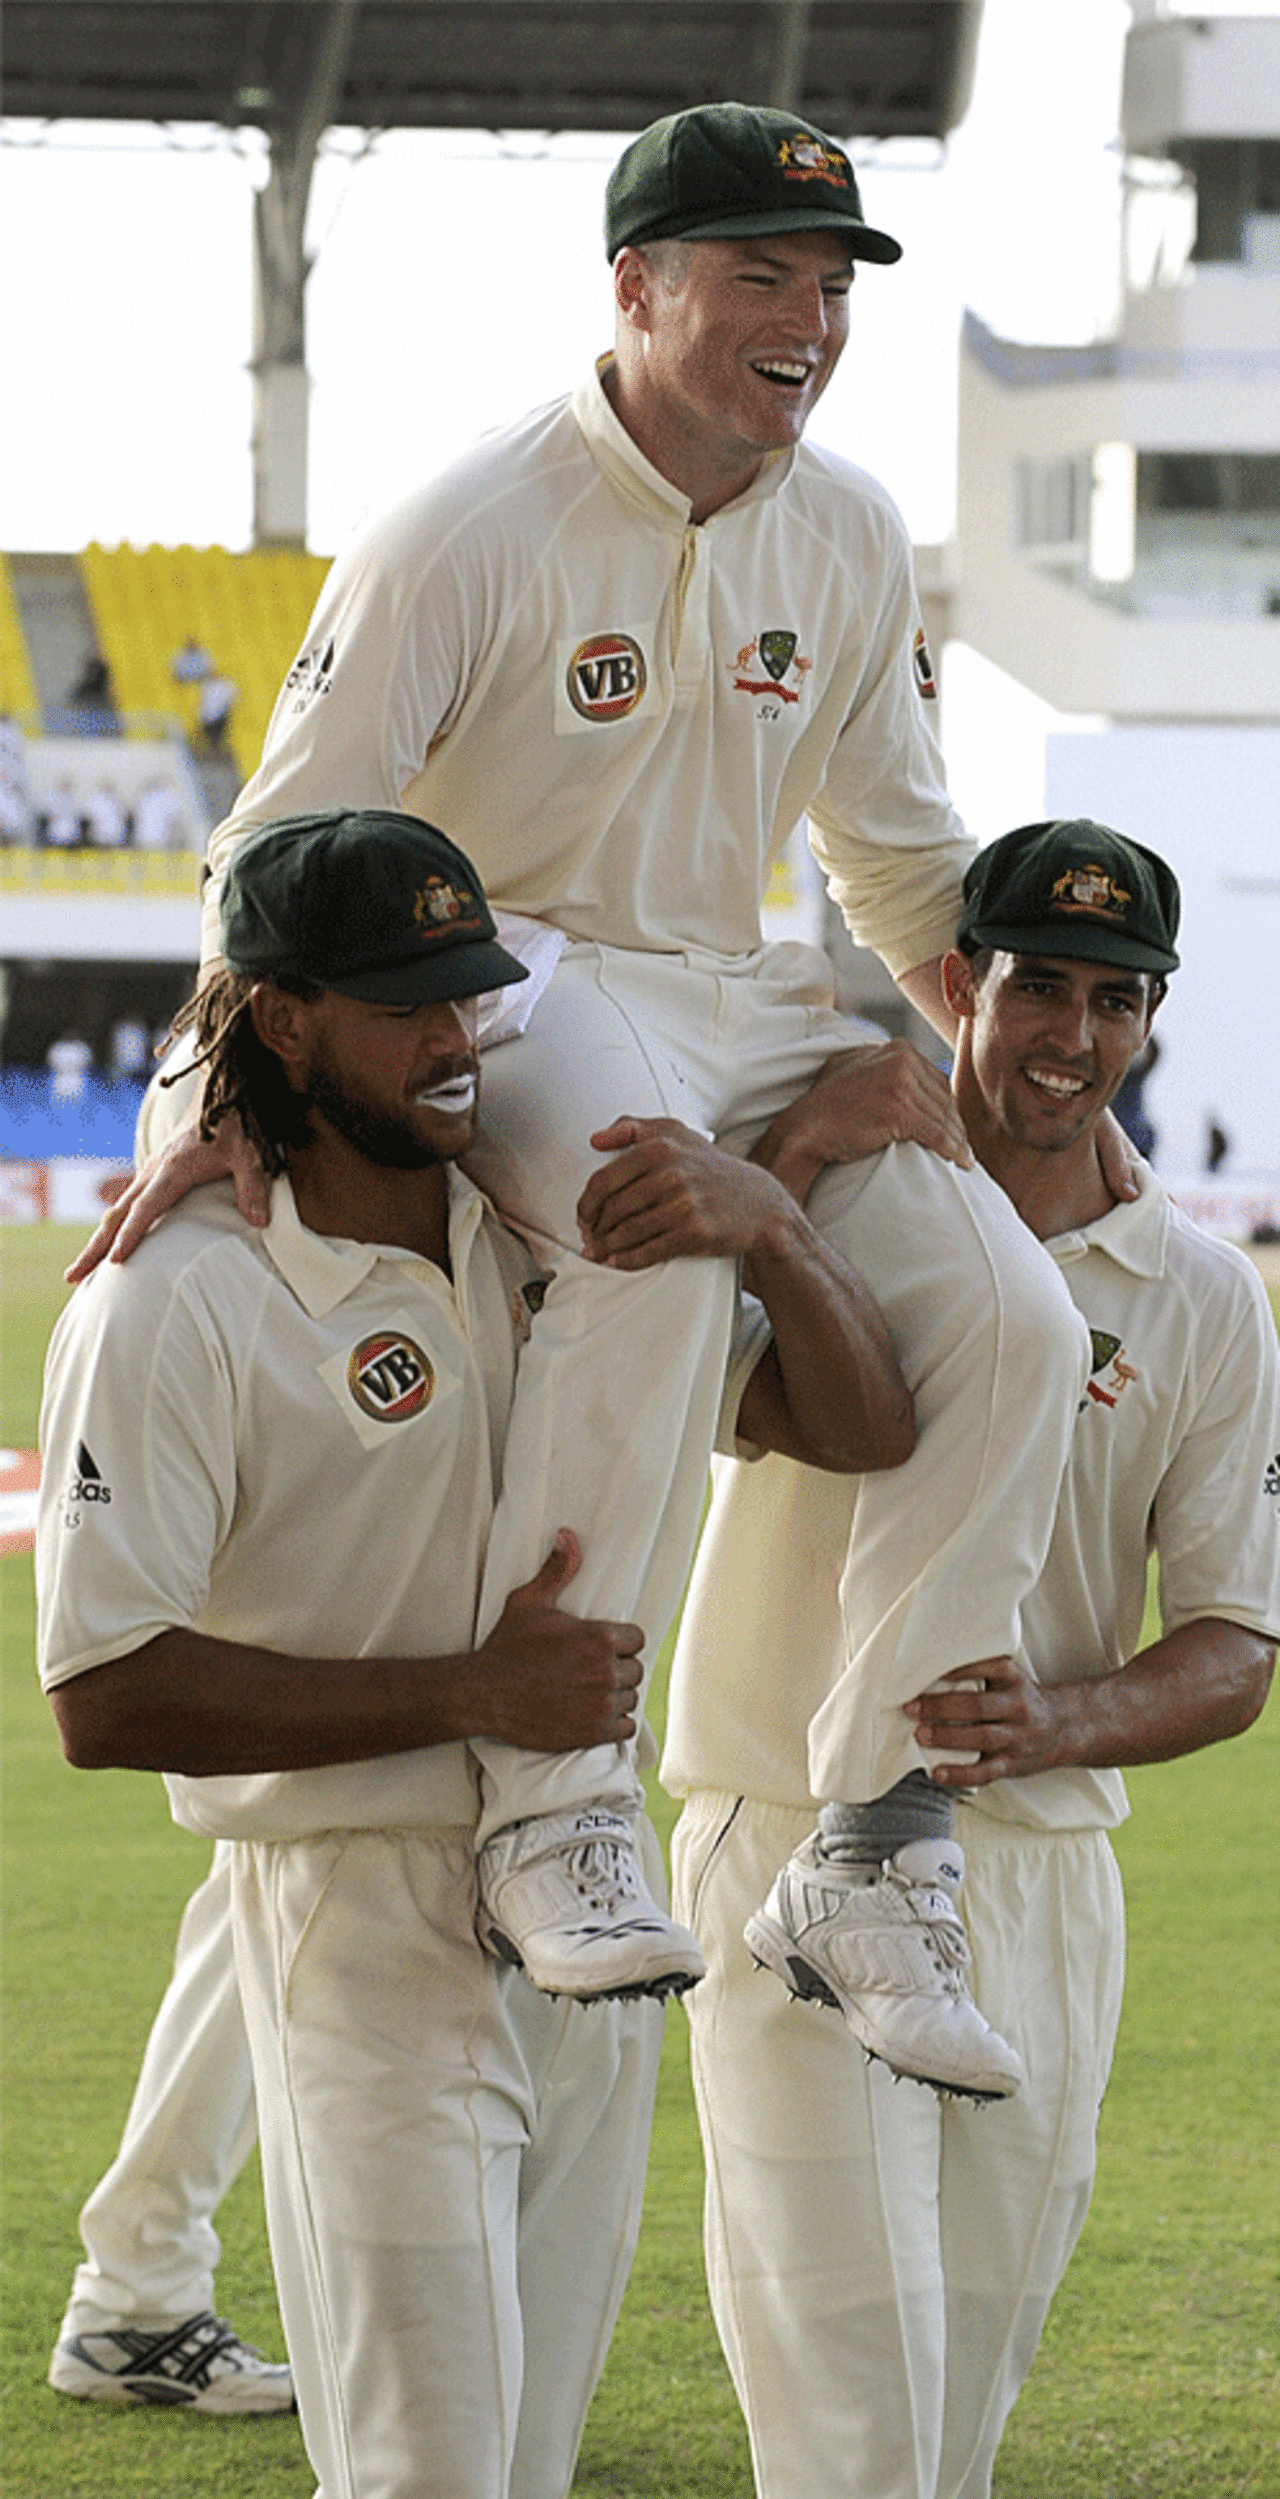 Enjoy the ride: Andrew Symonds and Mitchell Johnson give Stuart MacGill a lift, West Indies v Australia, 2nd Test, Antigua, June 3, 2008